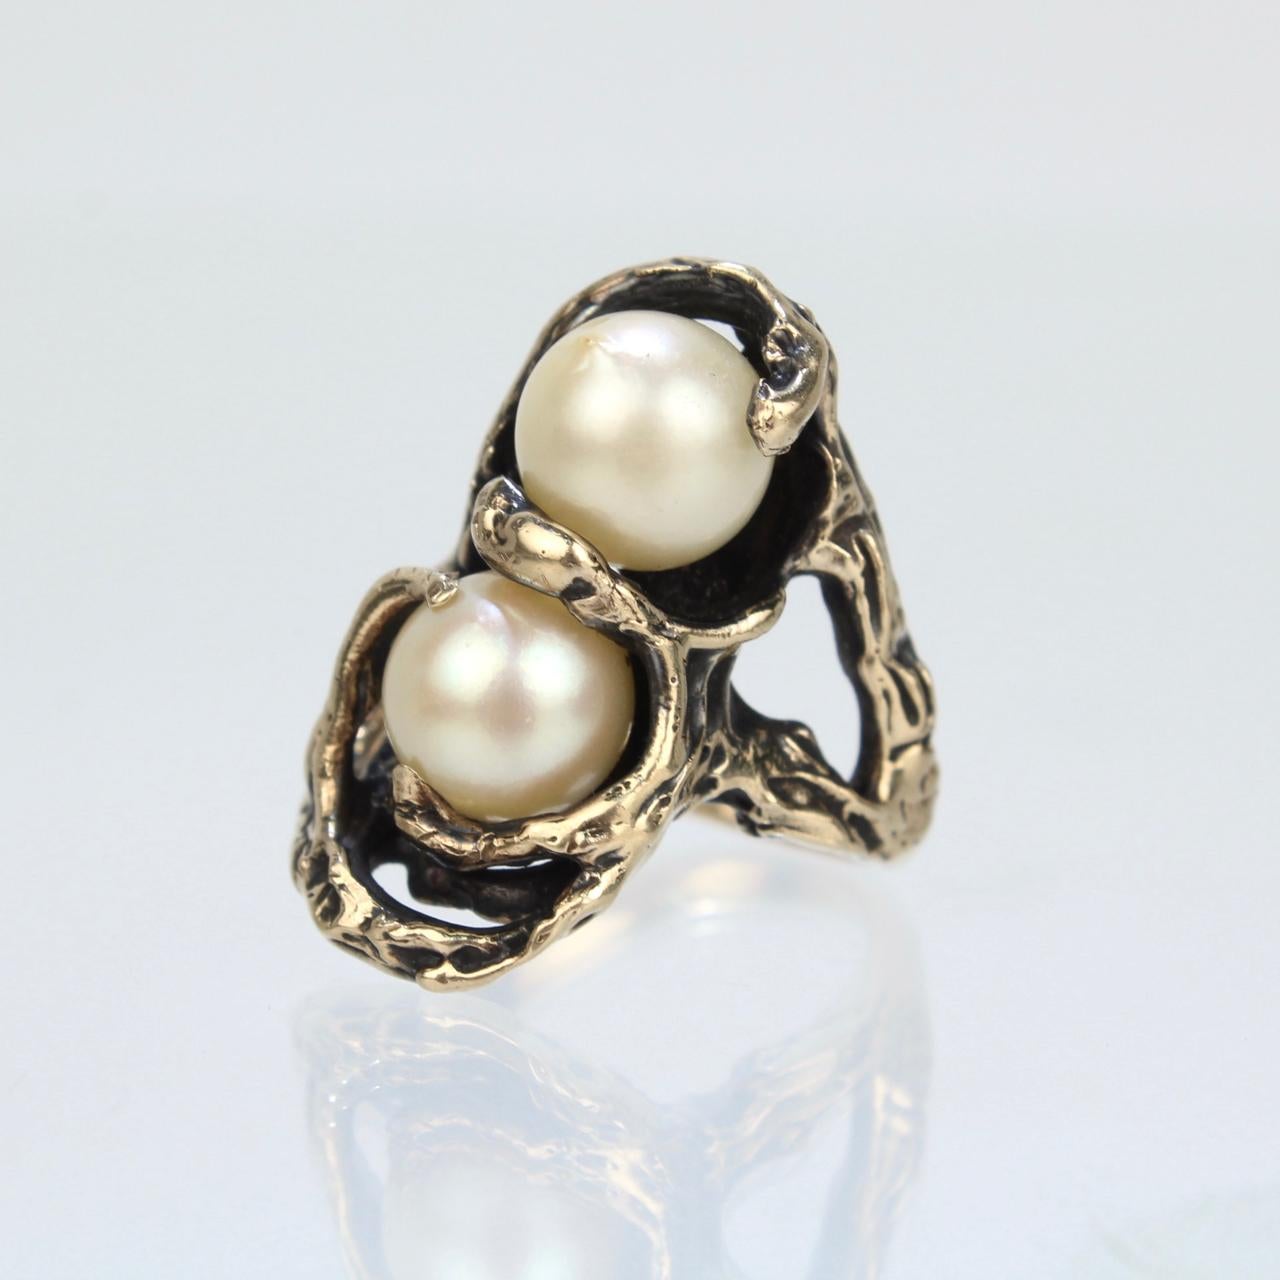 A very fine Brutalist double pearl ring.

Cast In 14k gold and set with 2 round white cultured pearls. 

A cool, organic, modernist twist on the classic moi et toi ring!

Date:
20th Century

Marked:
14k for gold fineness

Measurements: 
Width: ca.